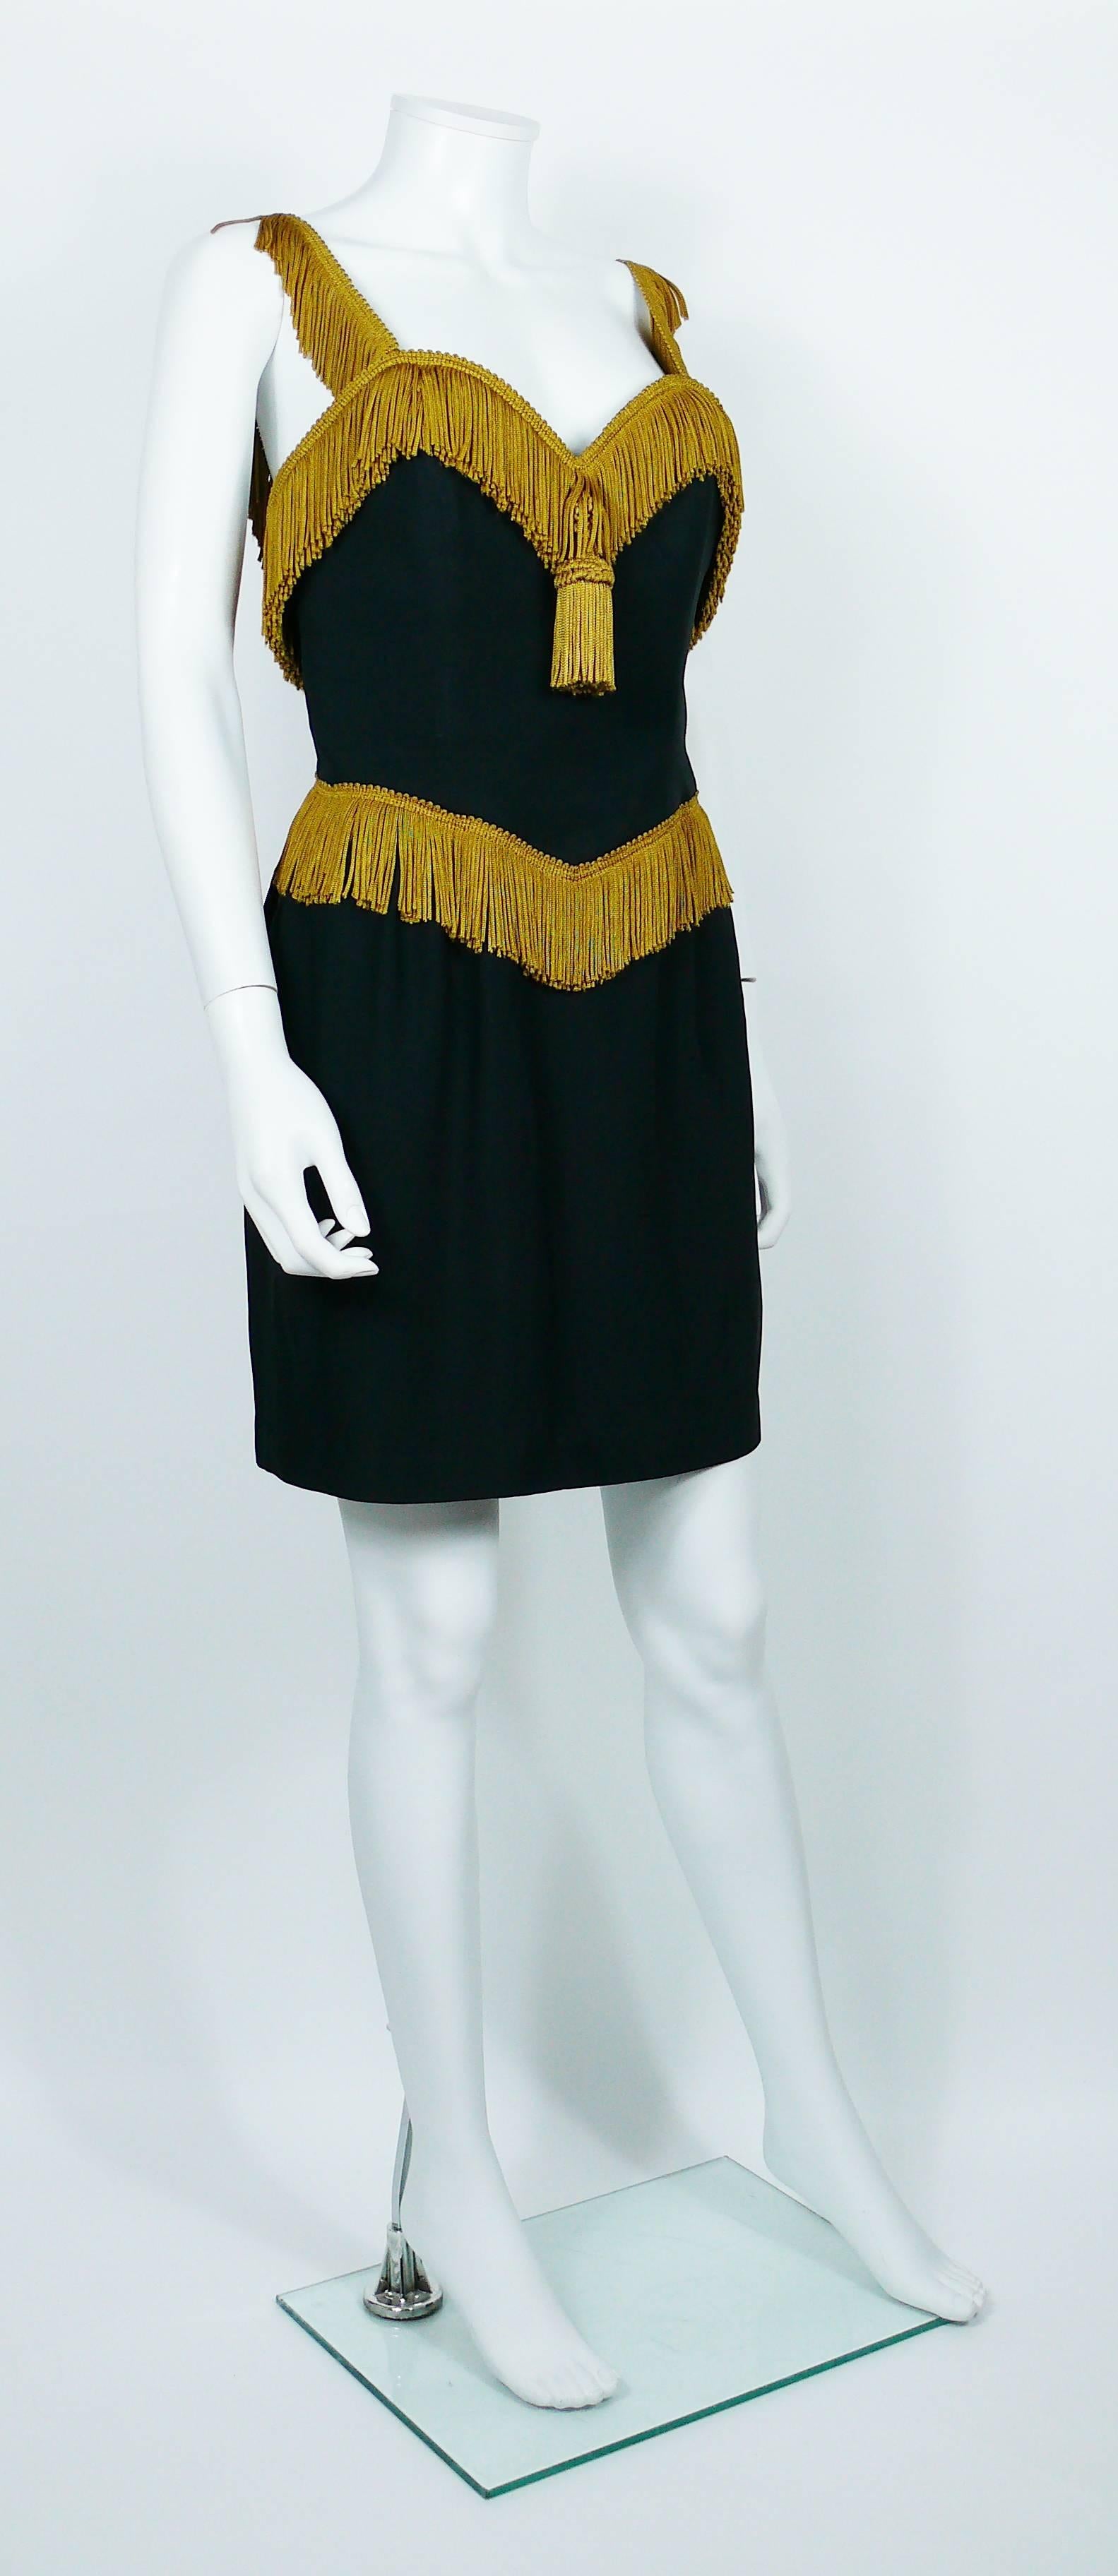 MOSCHINO COUTURE vintage black cocktail dress featuring passementerie details and a large tassel.

Spaghetti straps.
Back zip.

Label reads MOSCHINO COUTURE.

Size tag reads : I 44 / D 40 / F 40 / GB 12 / USA 10
Please check